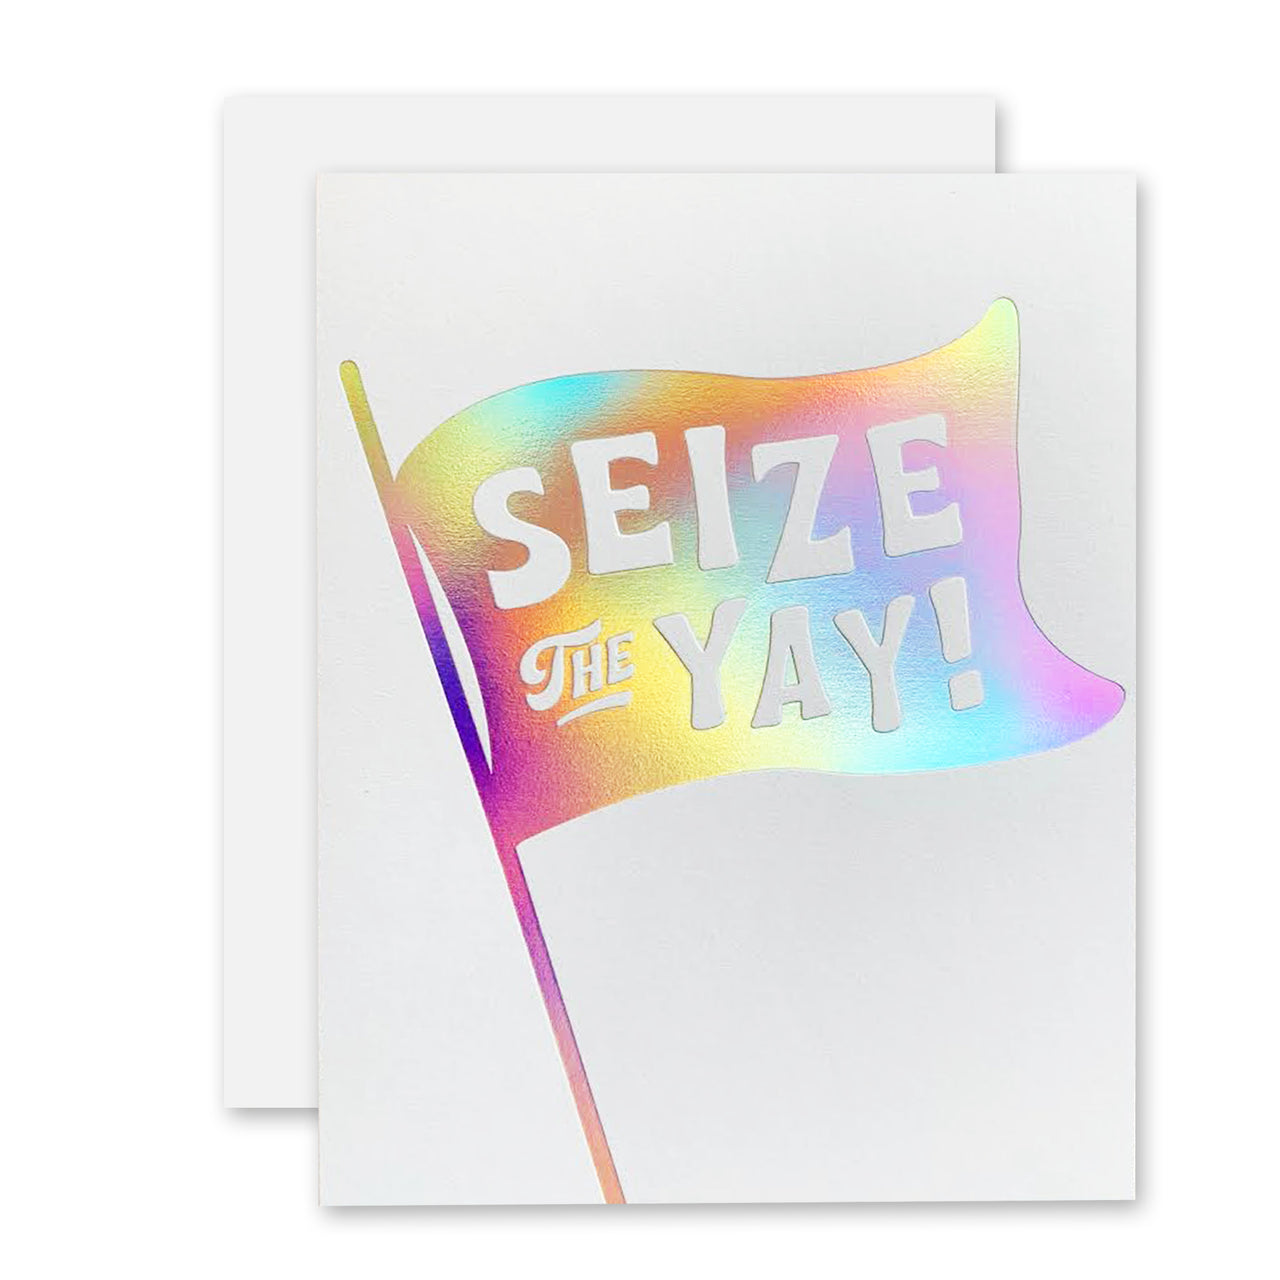 Seize the Yay!